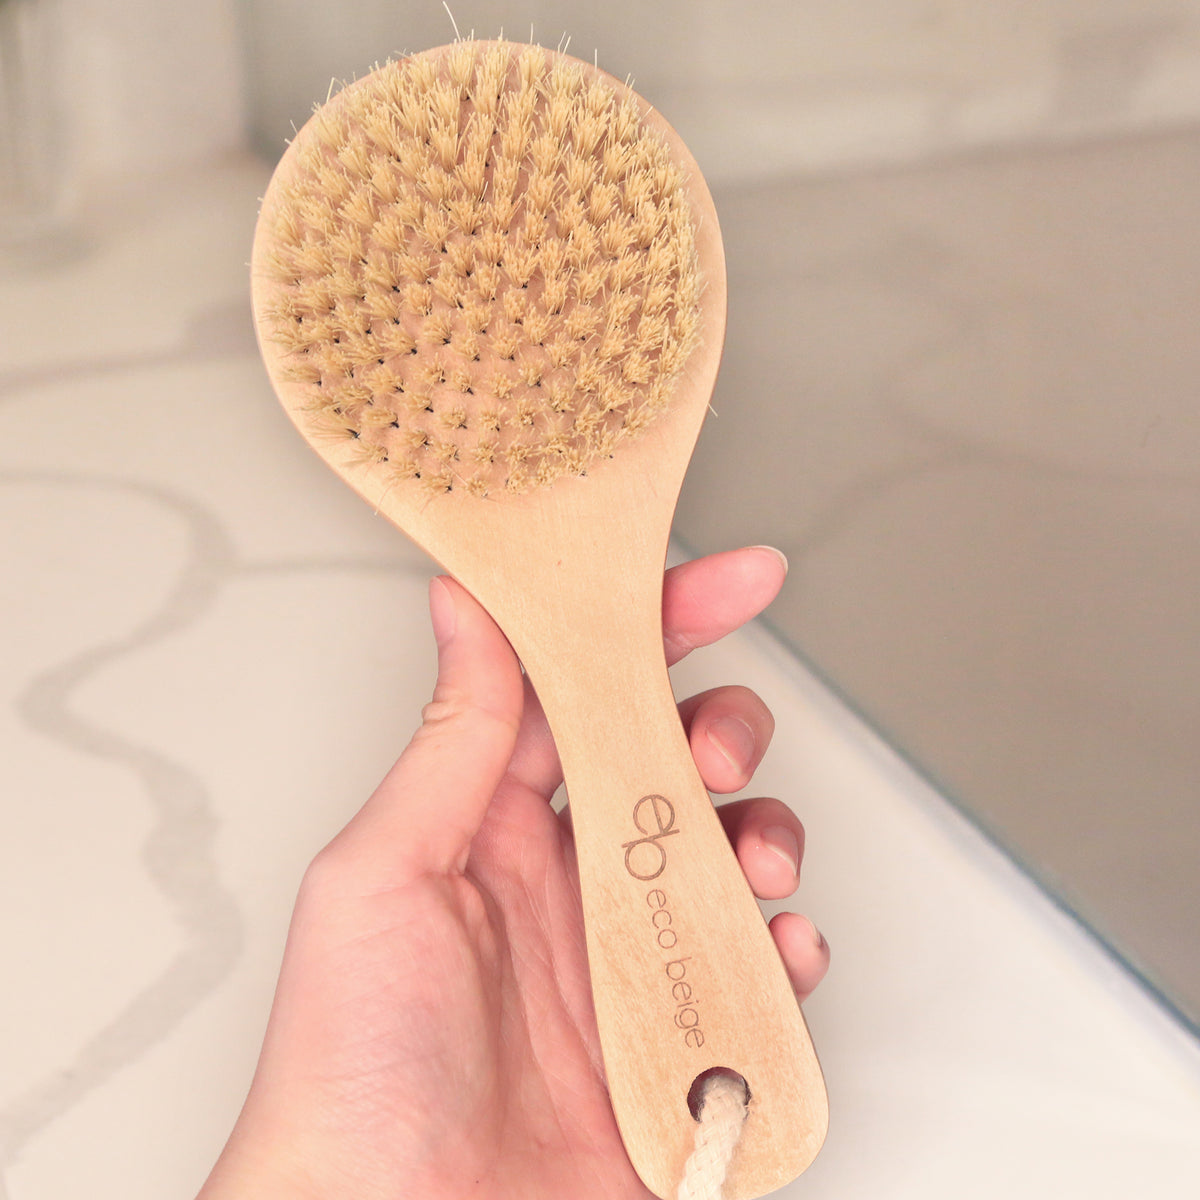 https://ecobeige.com/cdn/shop/products/Eco-Beige-ecofriendly-dry-skin-brush-natural-hemp-bamboo-plant-based-body-cleansing-exfoliator-bath-care-tool-sustainable-compostable-plastic-free-alternative-vancouver-Eco-Beige-1_1200x1200.jpg?v=1643186937